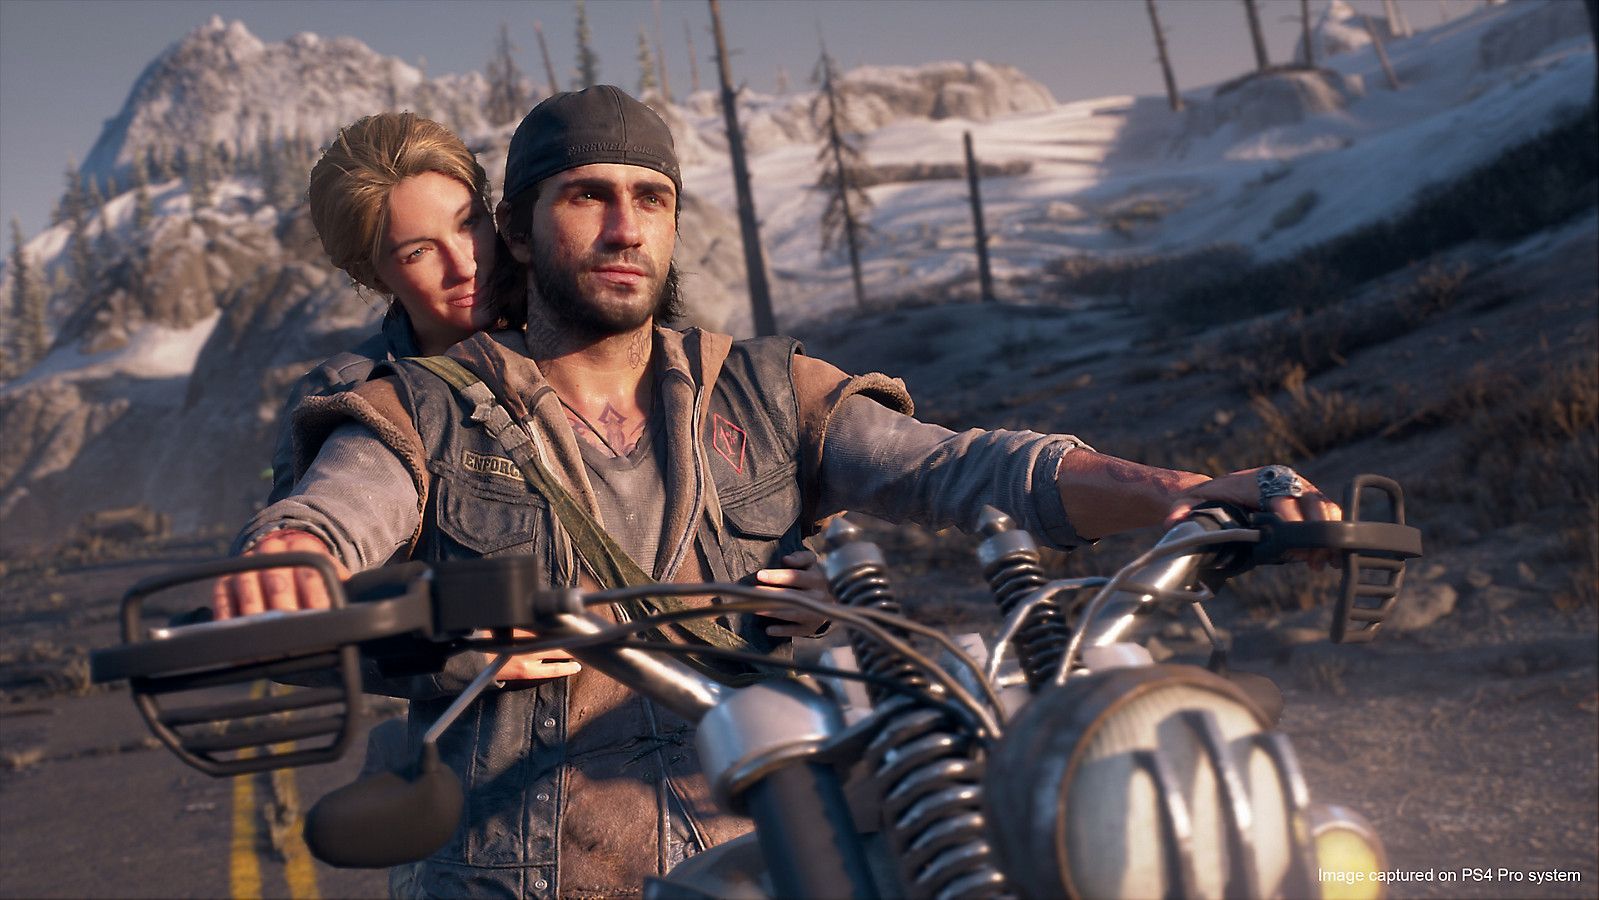 Deacon and Sarah on motorcycle